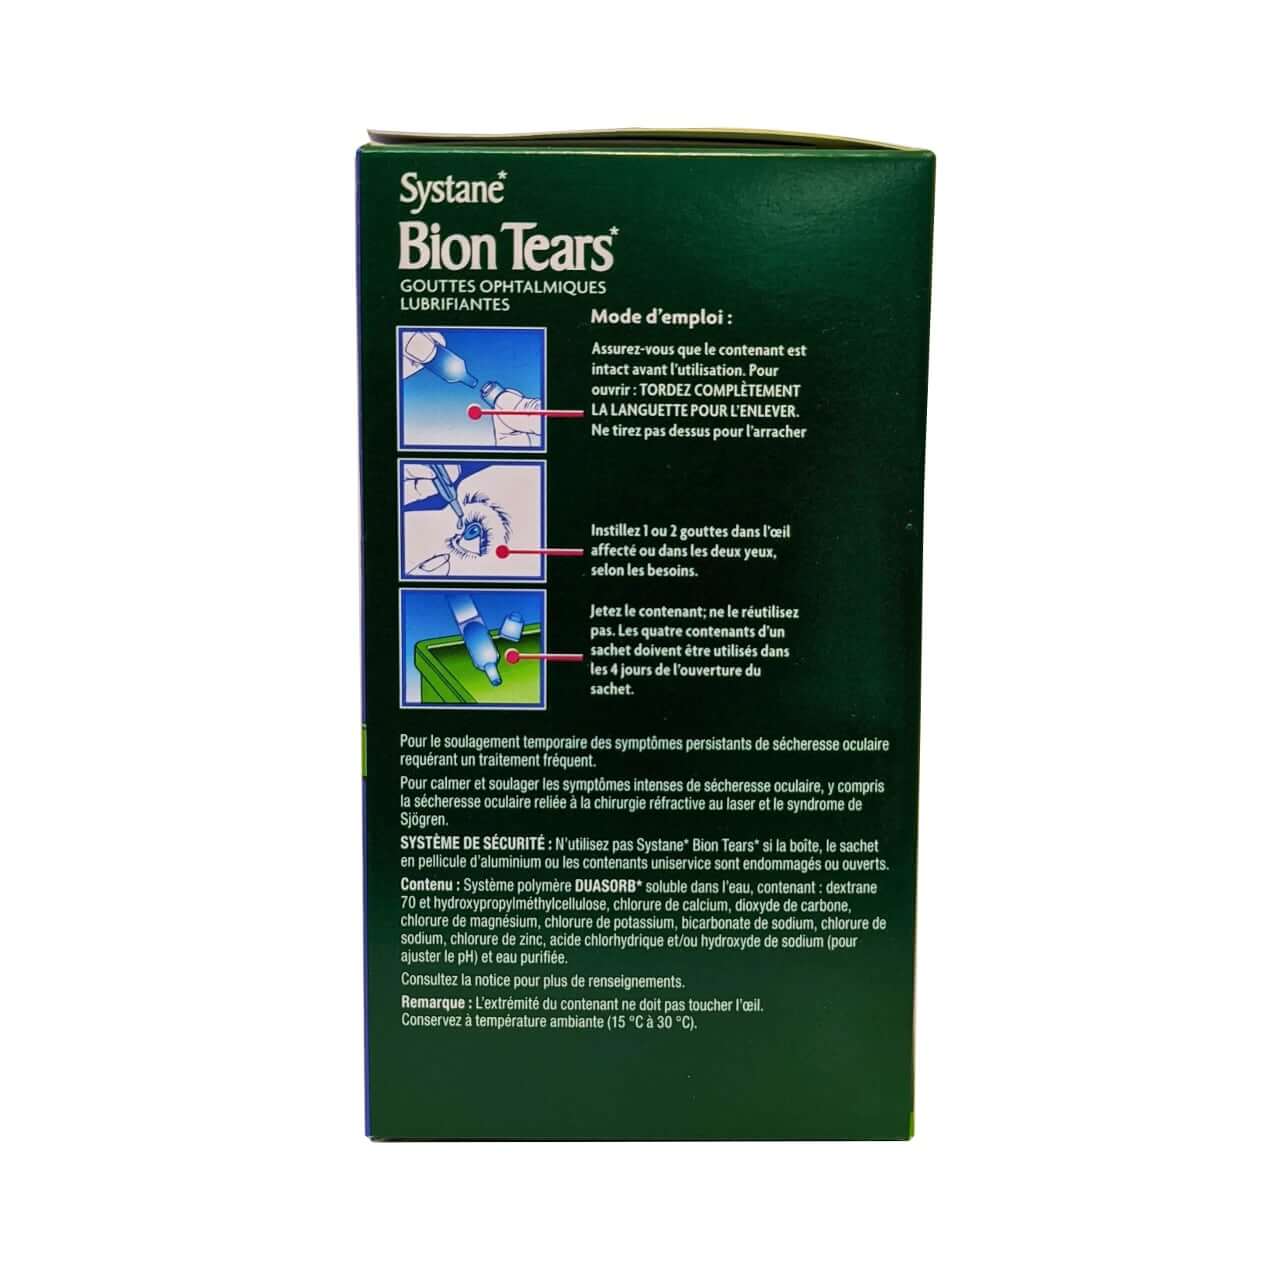 Product details, directions, and ingreients for Alcon Systane Bion Tears in French